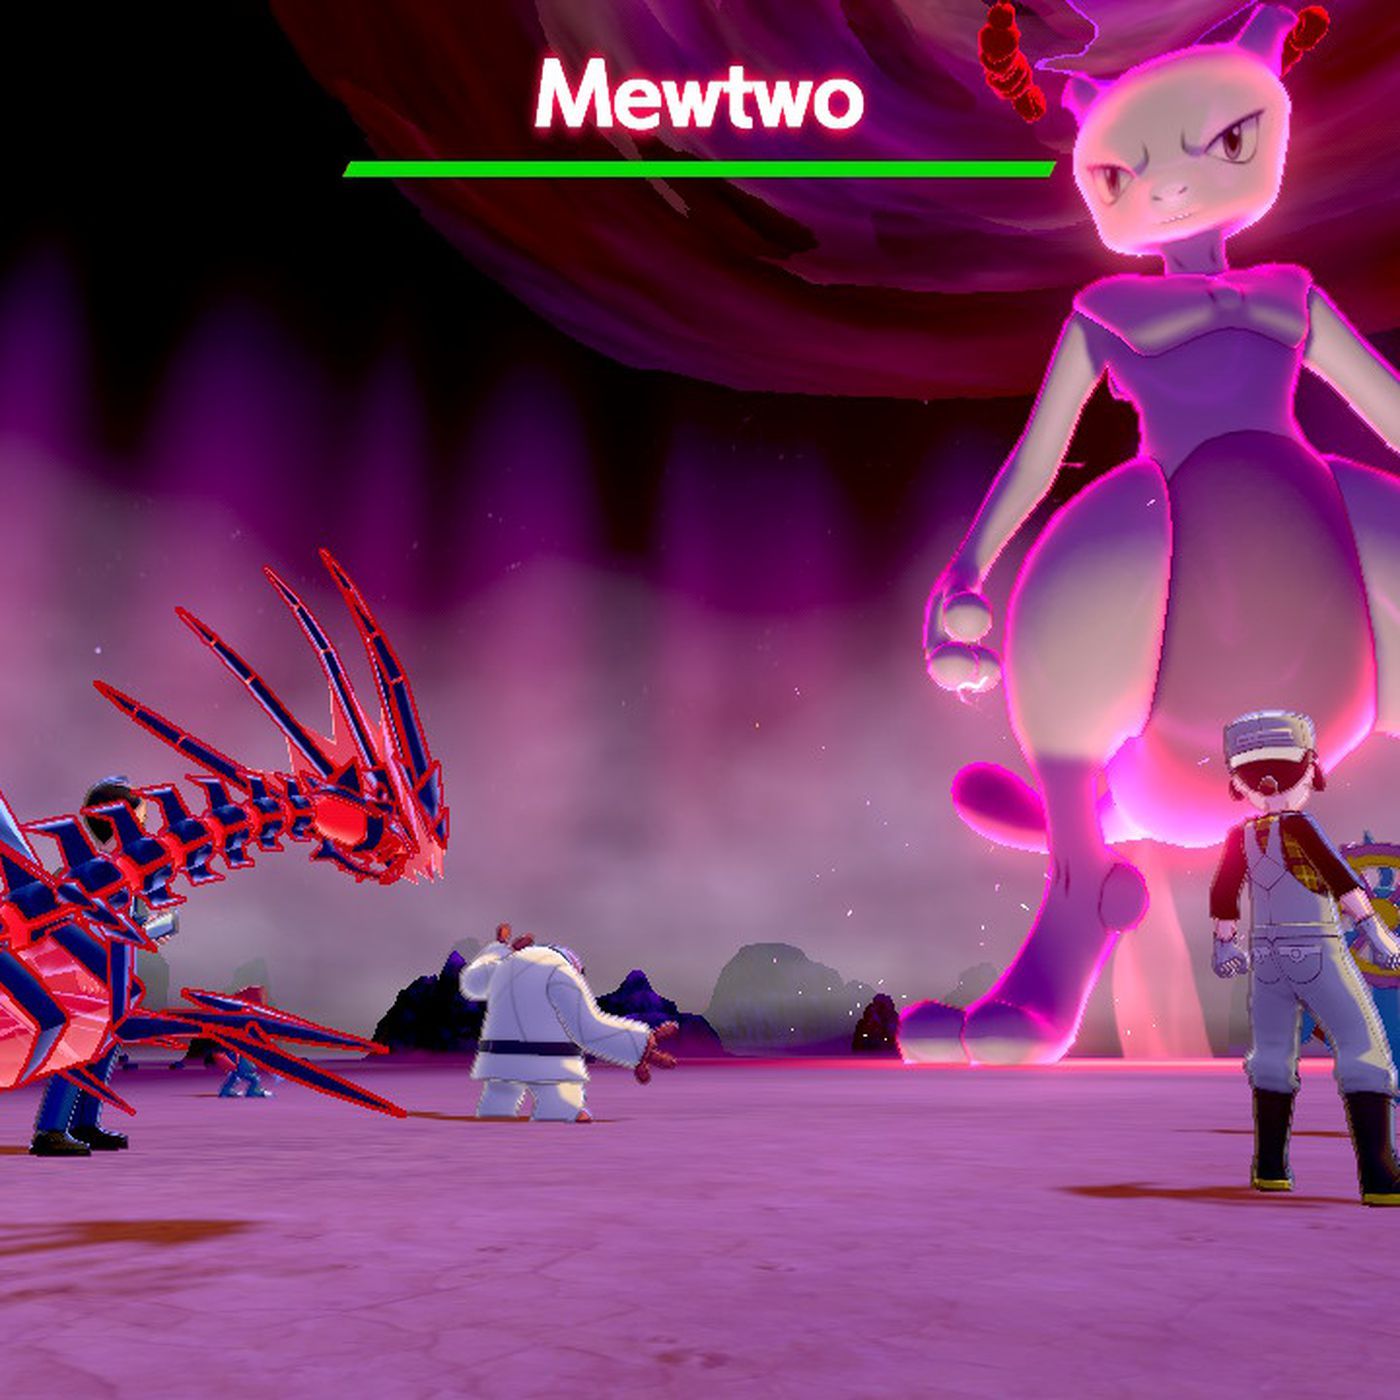 Mew And Mewtwo Wallpapers - Wallpaper Cave